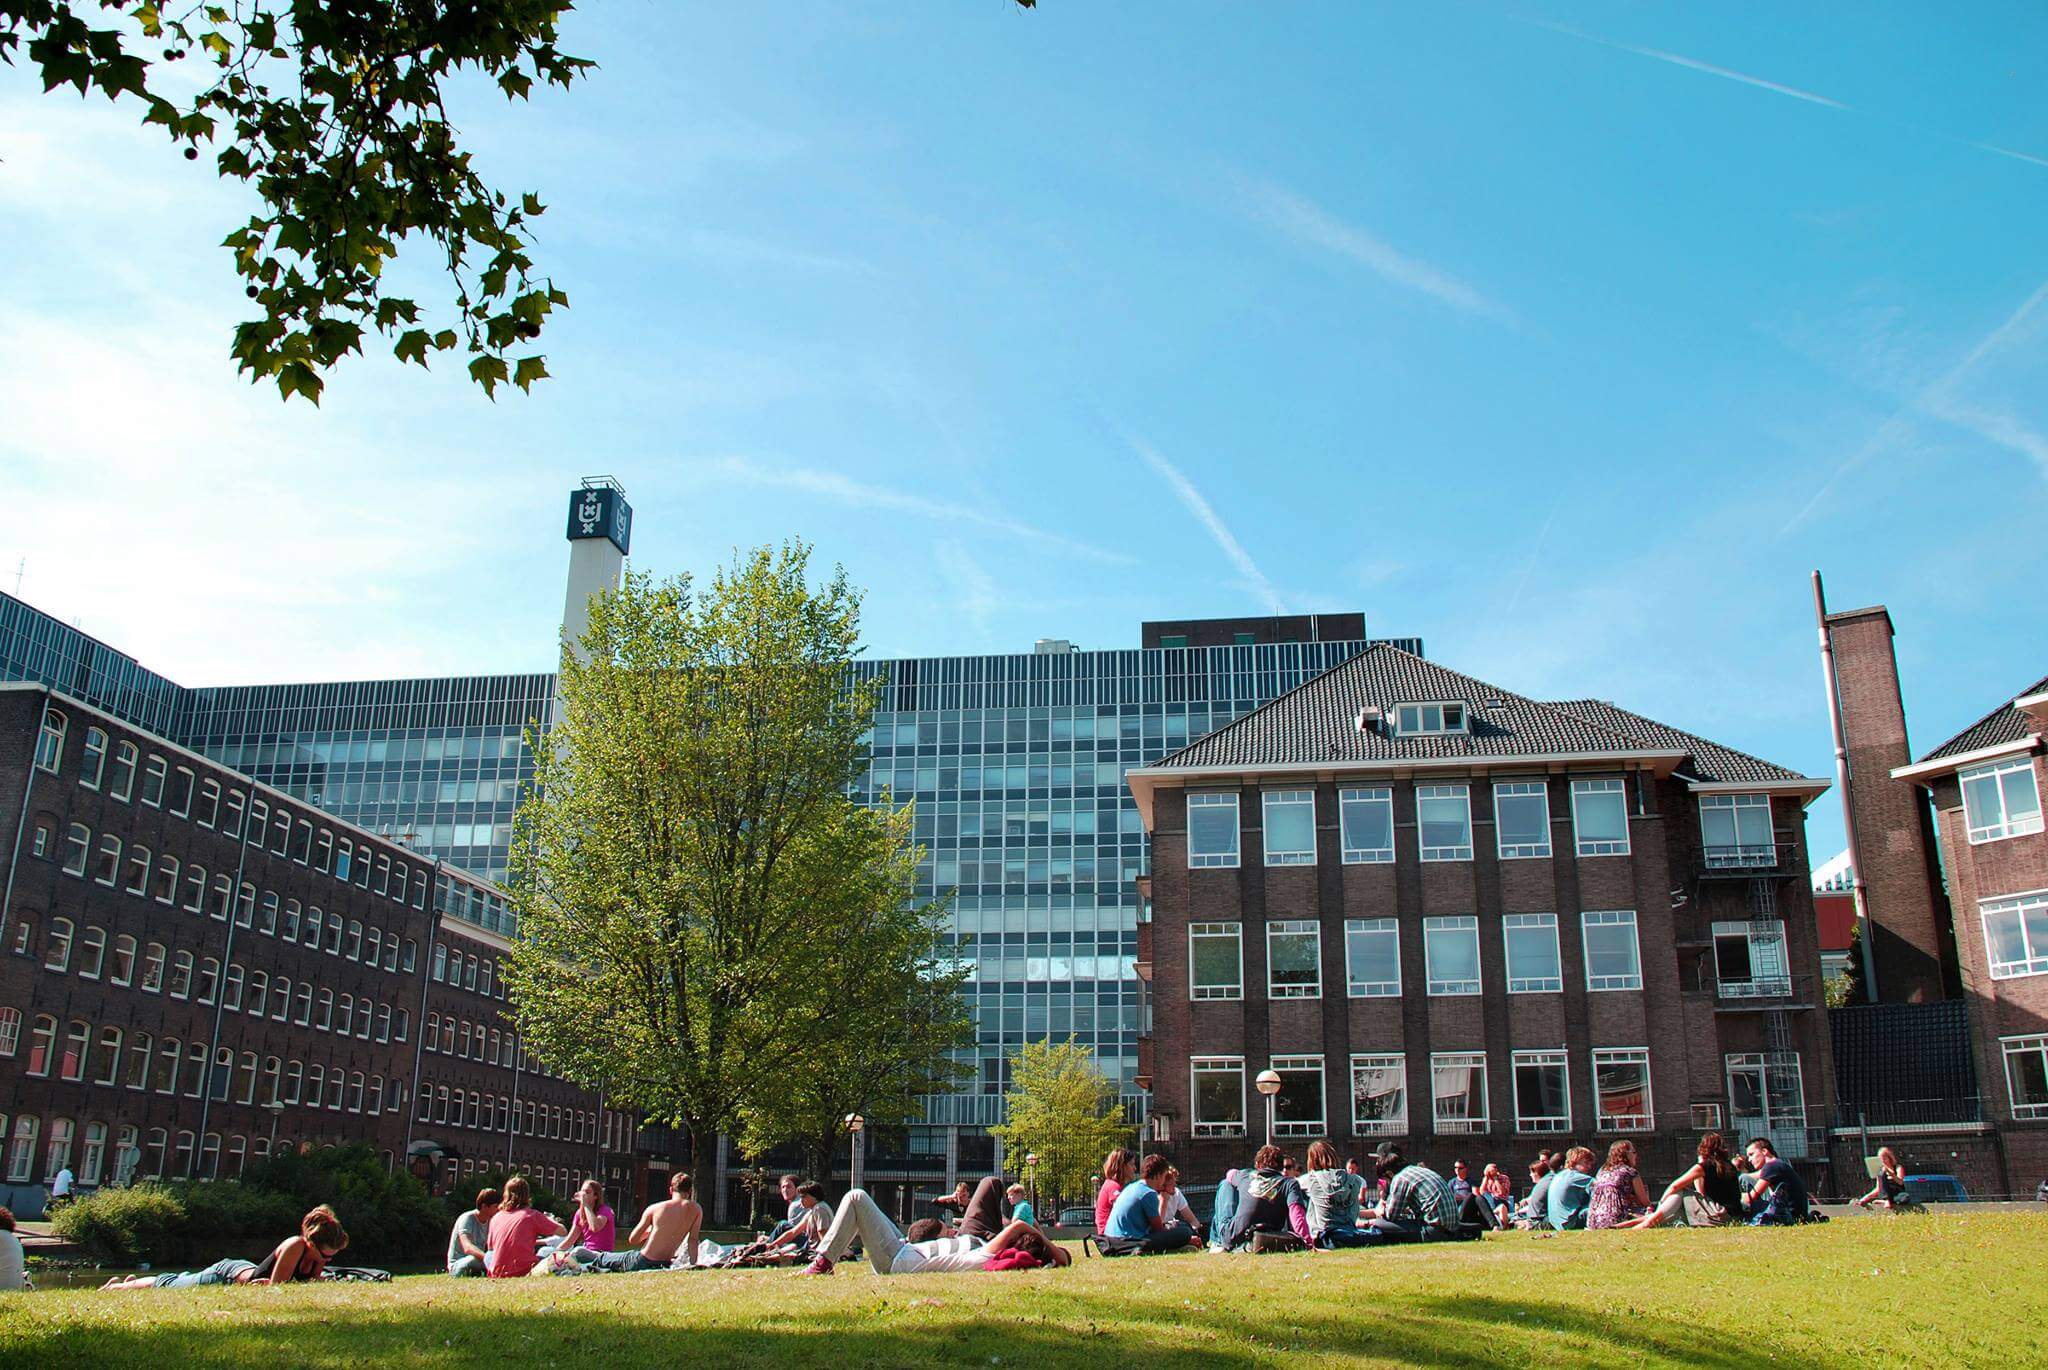 Study in the Netherlands Universities to consider